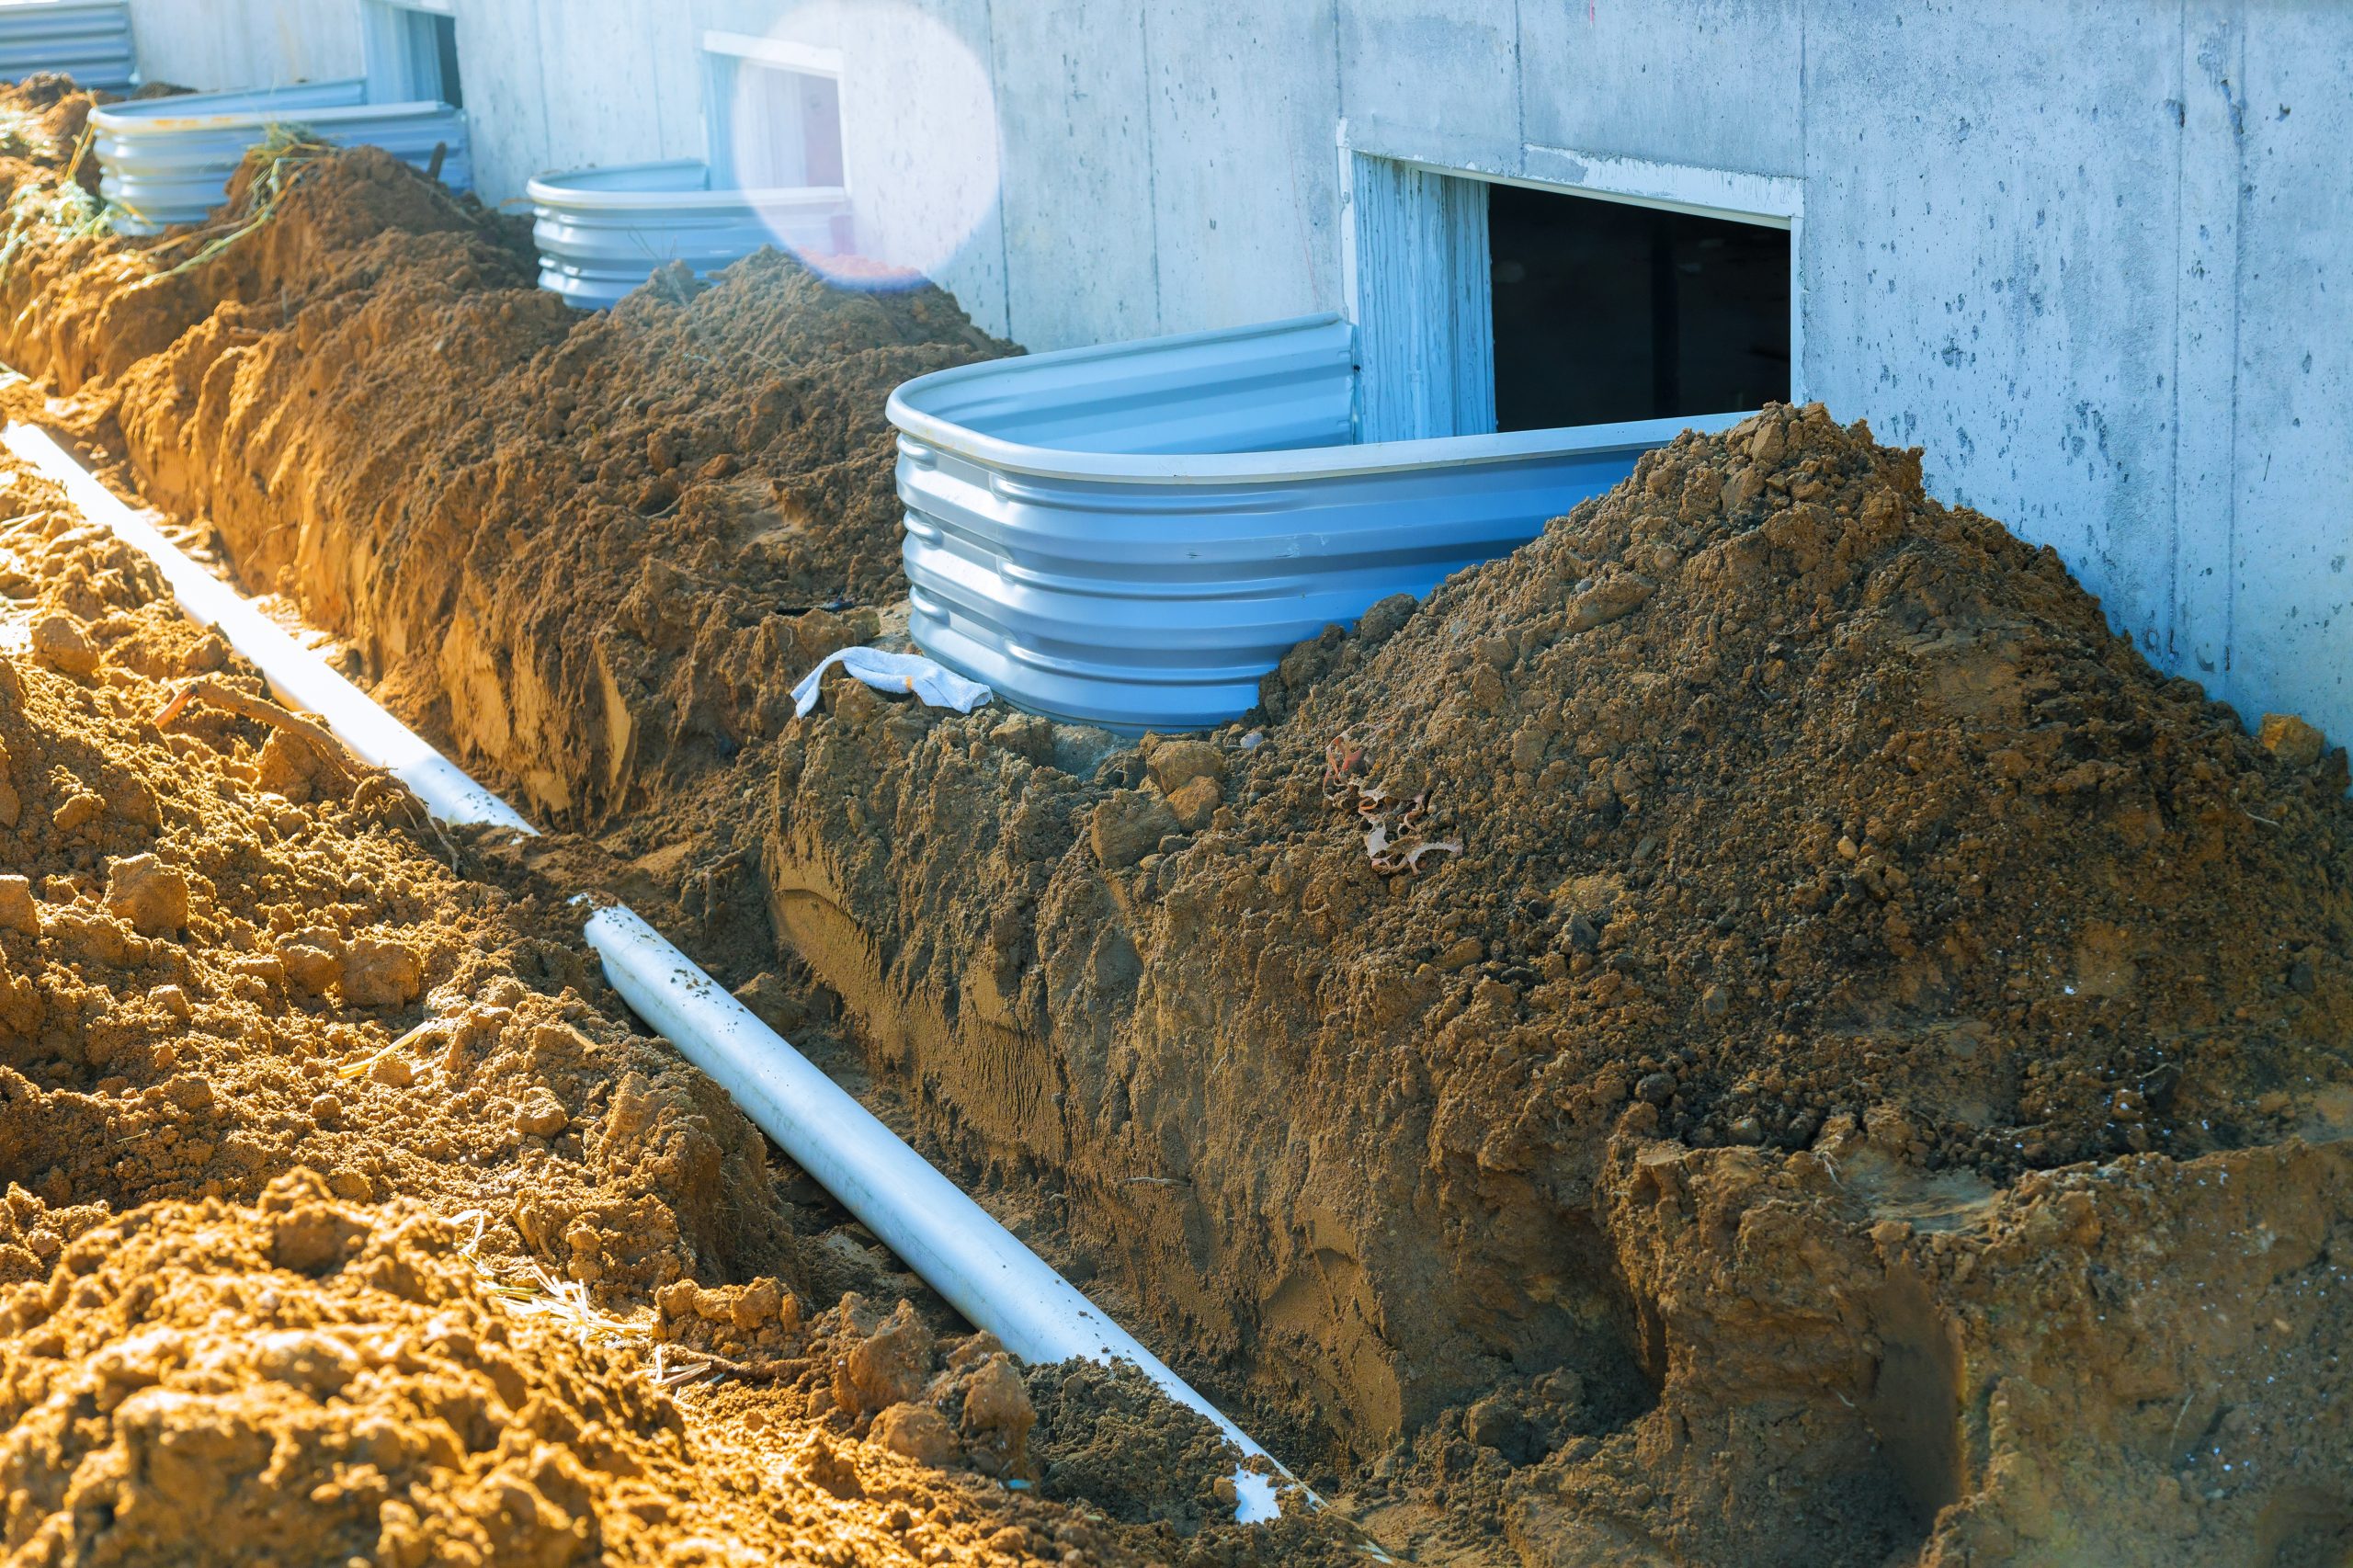 Piping surrounded by sand Drainage Plumber Perth from Perth Plumbing and Gasfitting